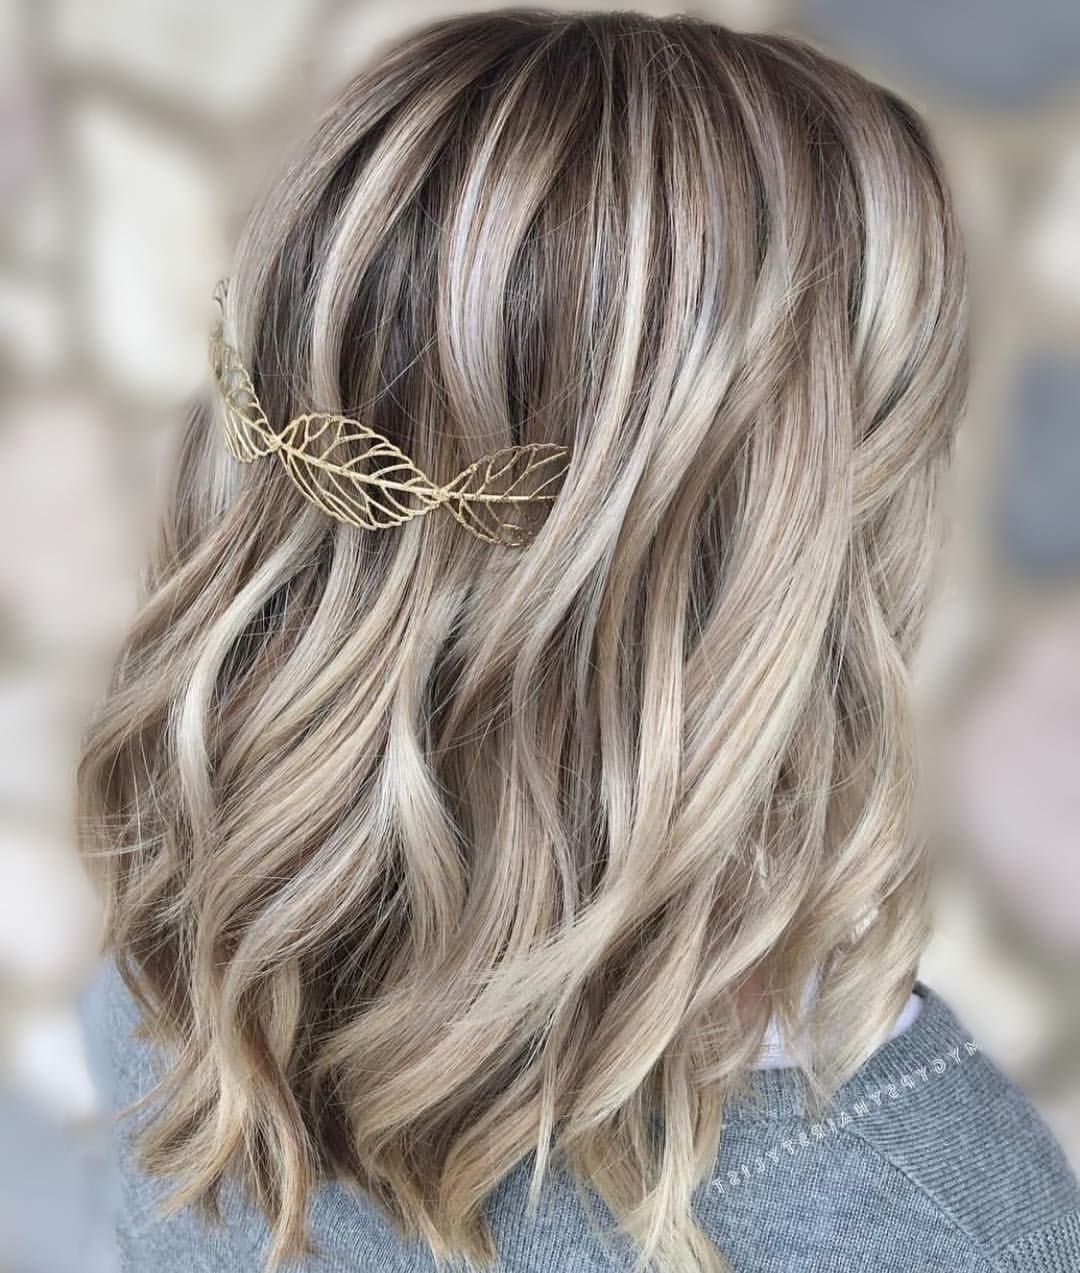 Icy Blonde/ Dimensional Blonde Balayage/ Ashy Blonde/ Low Pertaining To Best And Newest Curly Pixie Hairstyles With Light Blonde Highlights (Gallery 19 of 20)